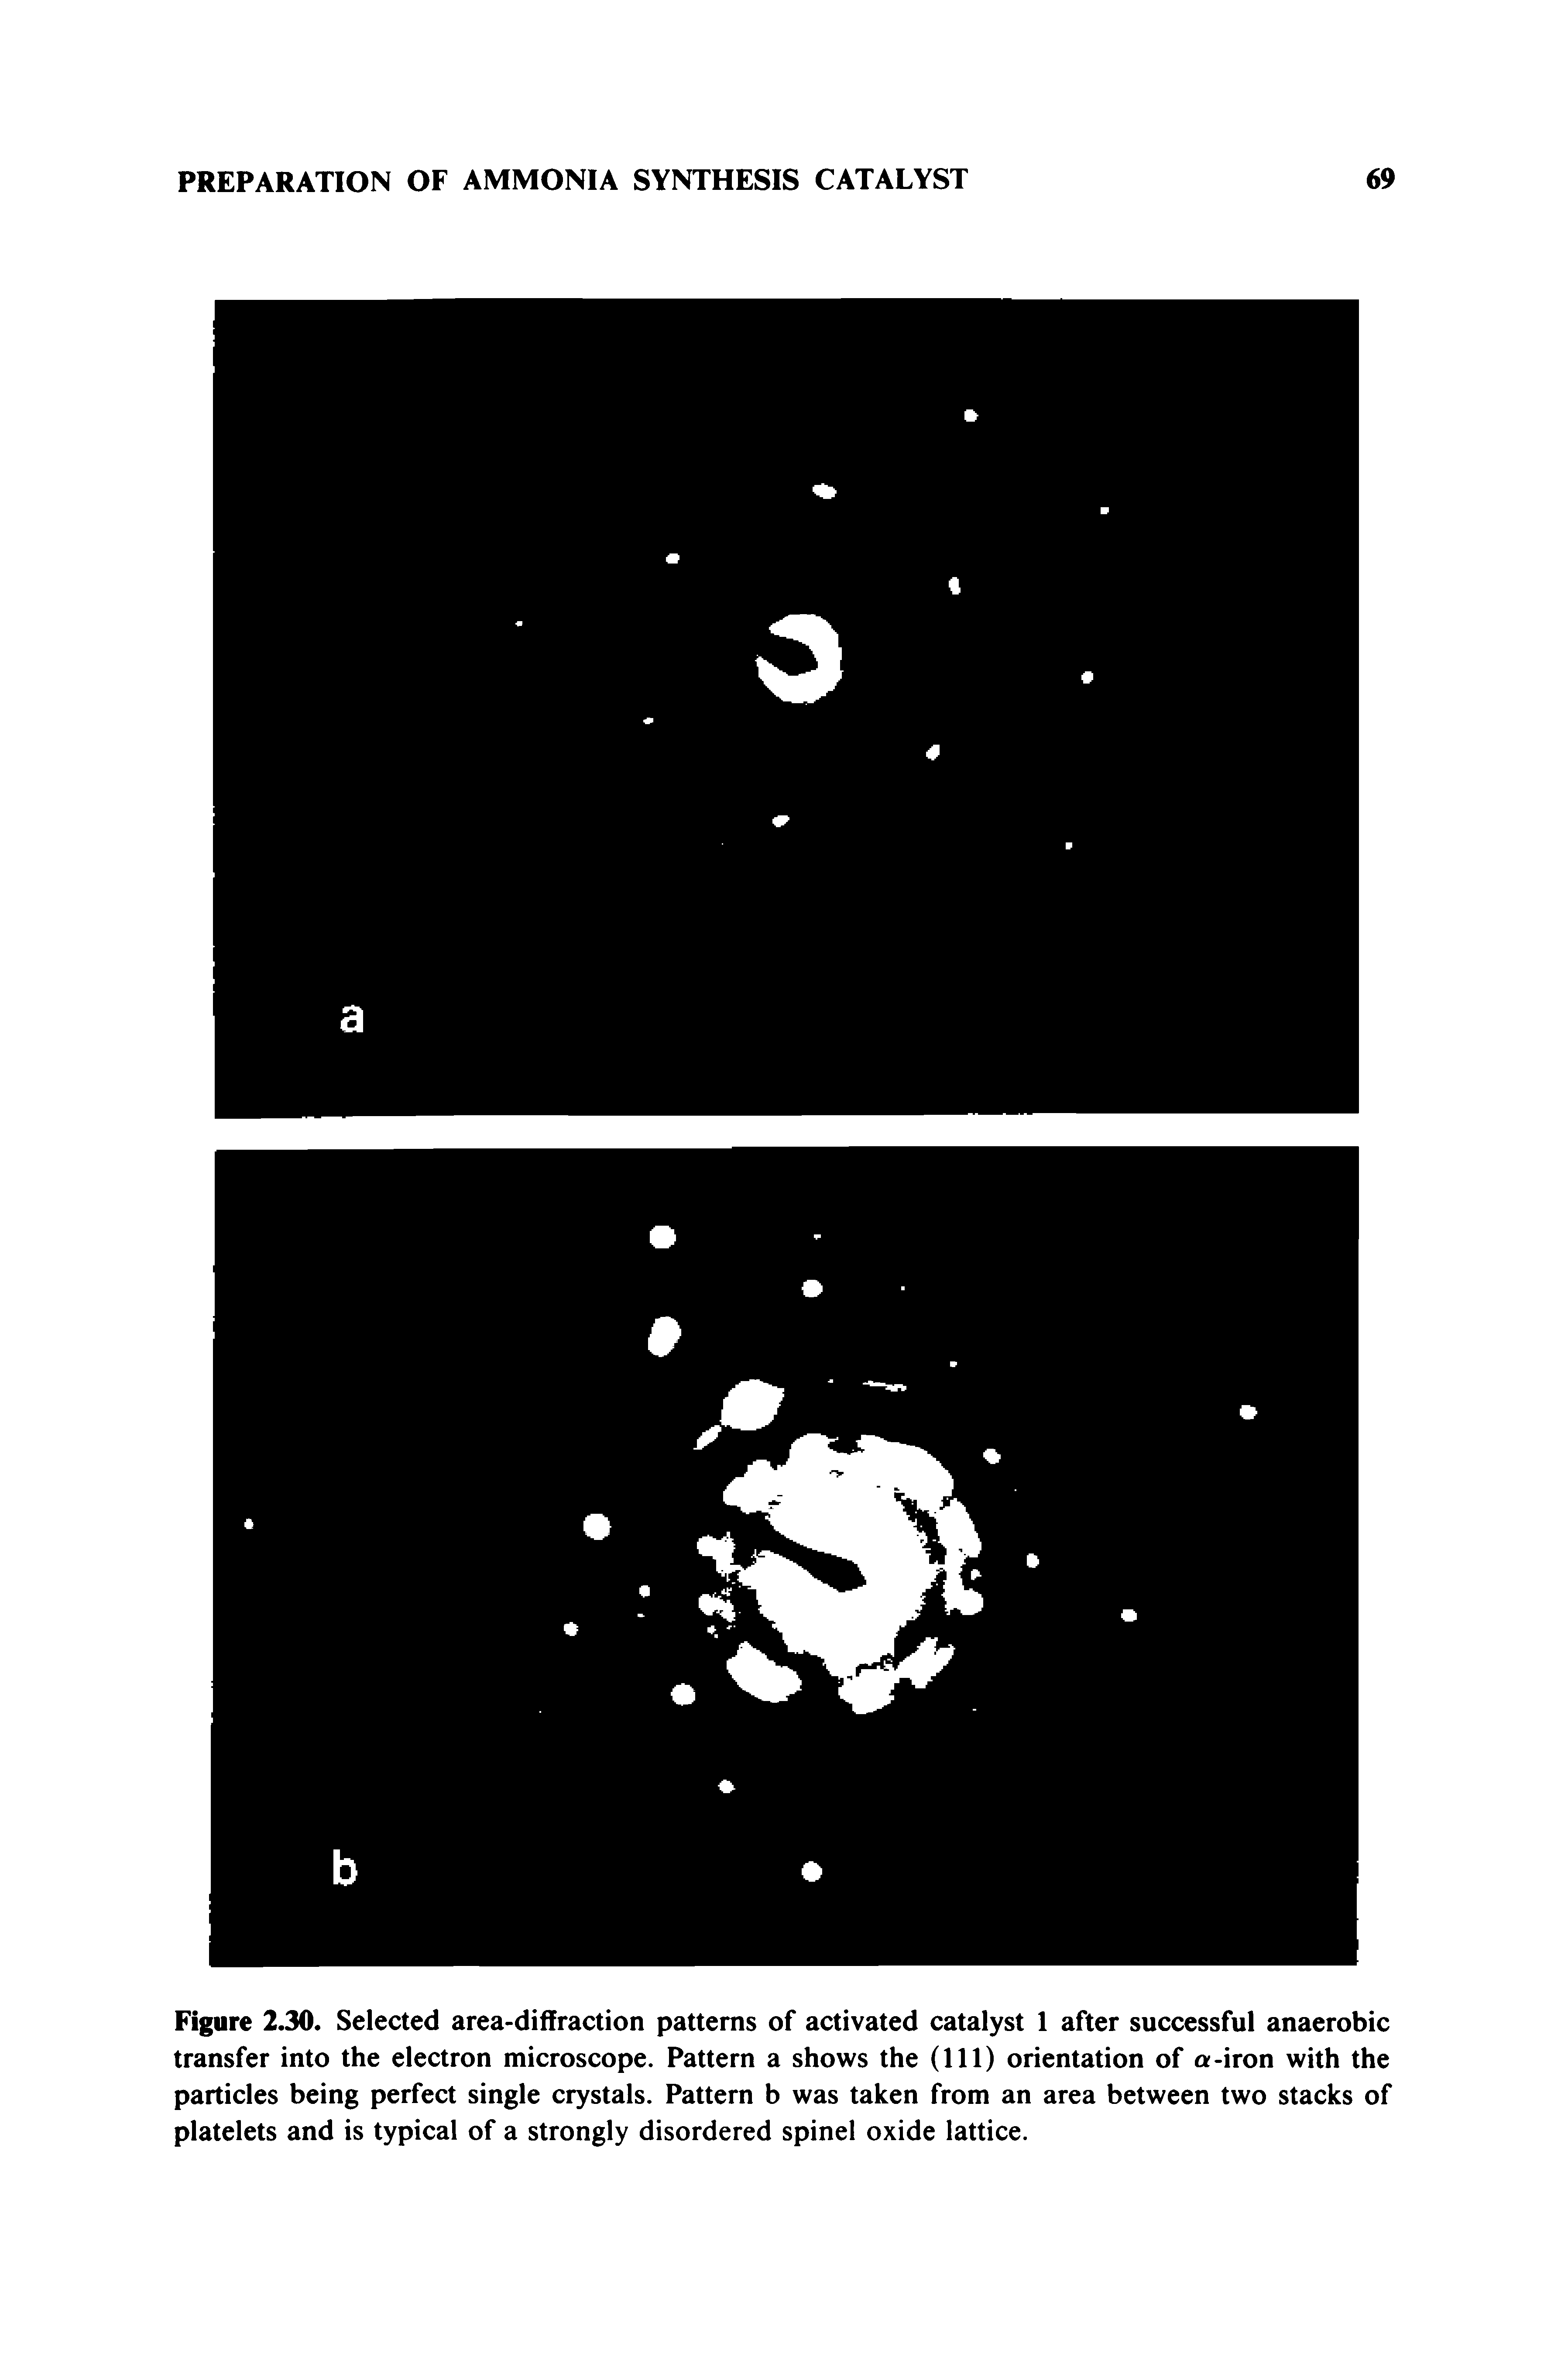 Figure 2.30. Selected area-diffraction patterns of activated catalyst 1 after successful anaerobic transfer into the electron microscope. Pattern a shows the (111) orientation of a-iron with the particles being perfect single crystals. Pattern b was taken from an area between two stacks of platelets and is typical of a strongly disordered spinel oxide lattice.